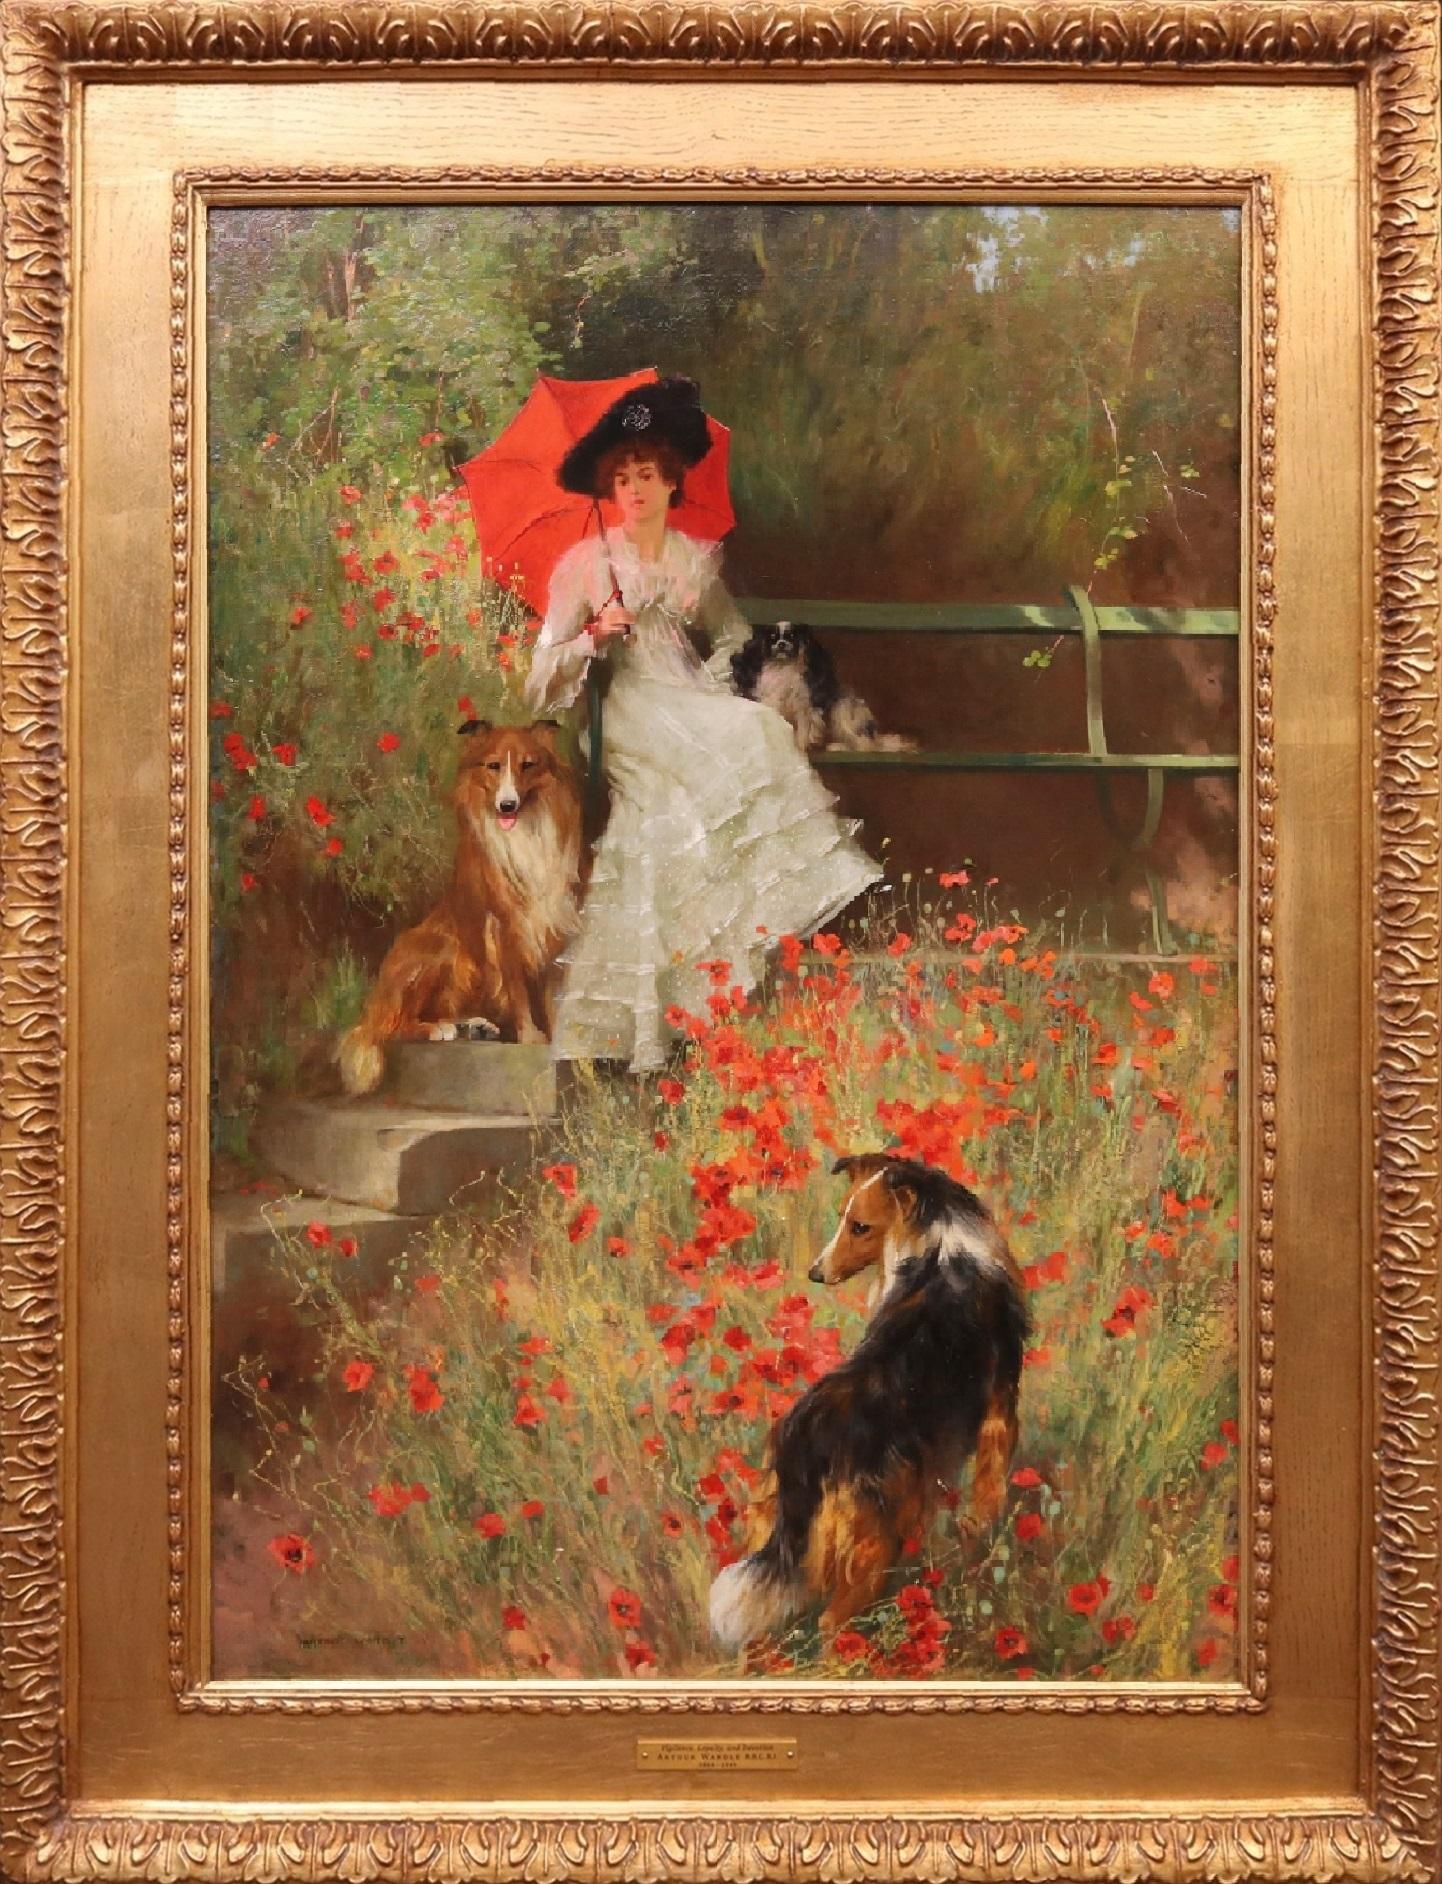 ‘Vigilance, Loyalty, and Devotion’ by Arthur Wardle R.B.C. R.I. (1864-1949).

The painting – which depicts a young Edwardian beauty with parasol surrounded by poppies and three faithful canine companions – is signed by the artist and hangs in a fine